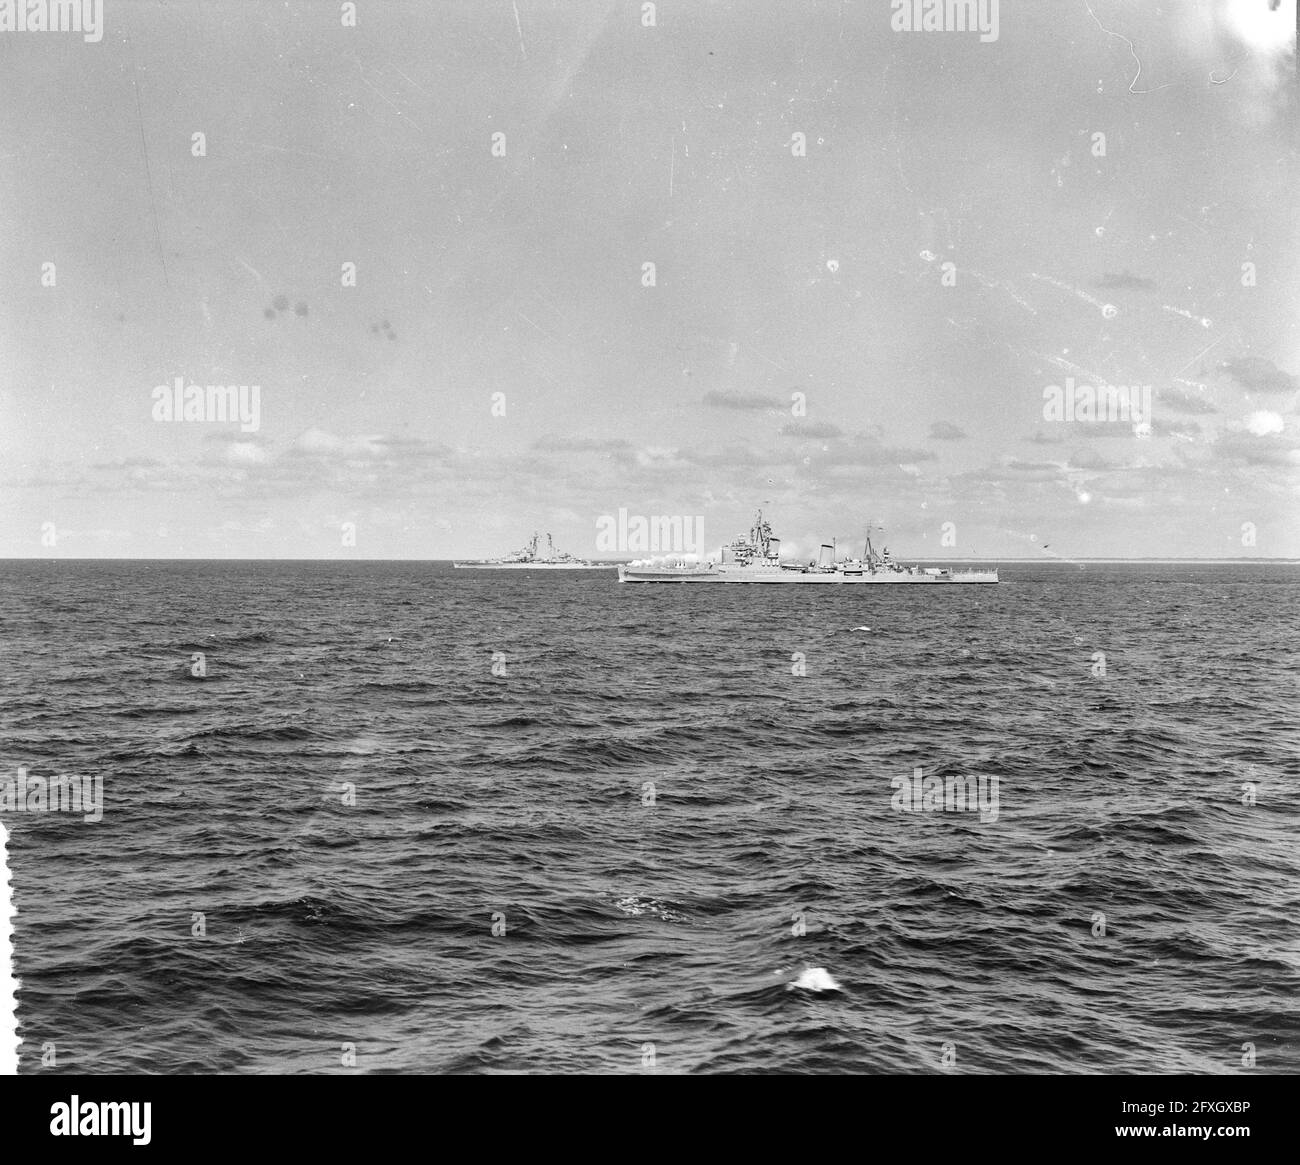 Fleet exercise in the North Sea (aboard De Ruyter ), June 15, 1956, Fleet exercises, The Netherlands, 20th century press agency photo, news to remember, documentary, historic photography 1945-1990, visual stories, human history of the Twentieth Century, capturing moments in time Stock Photo